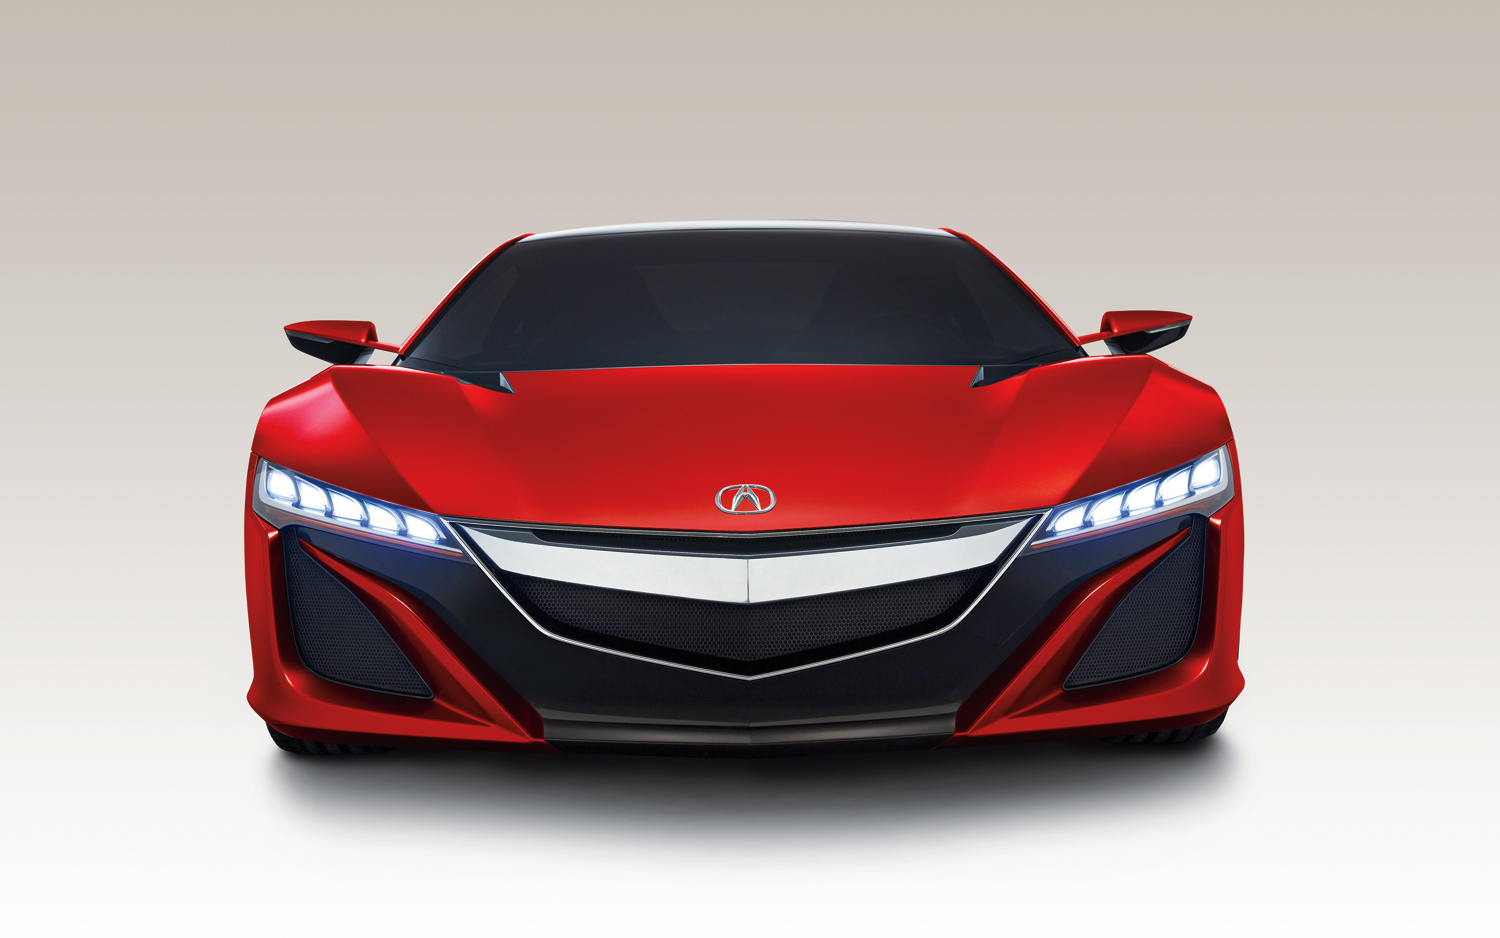 Free Download 2015 Acura Nsx Wallpaper 2015 Car Reviews Prices And Specs 1500x938 For Your Desktop Mobile Tablet Explore 45 Nsx Wallpaper High Resolution Acura Logo Wallpaper Honda Nsx